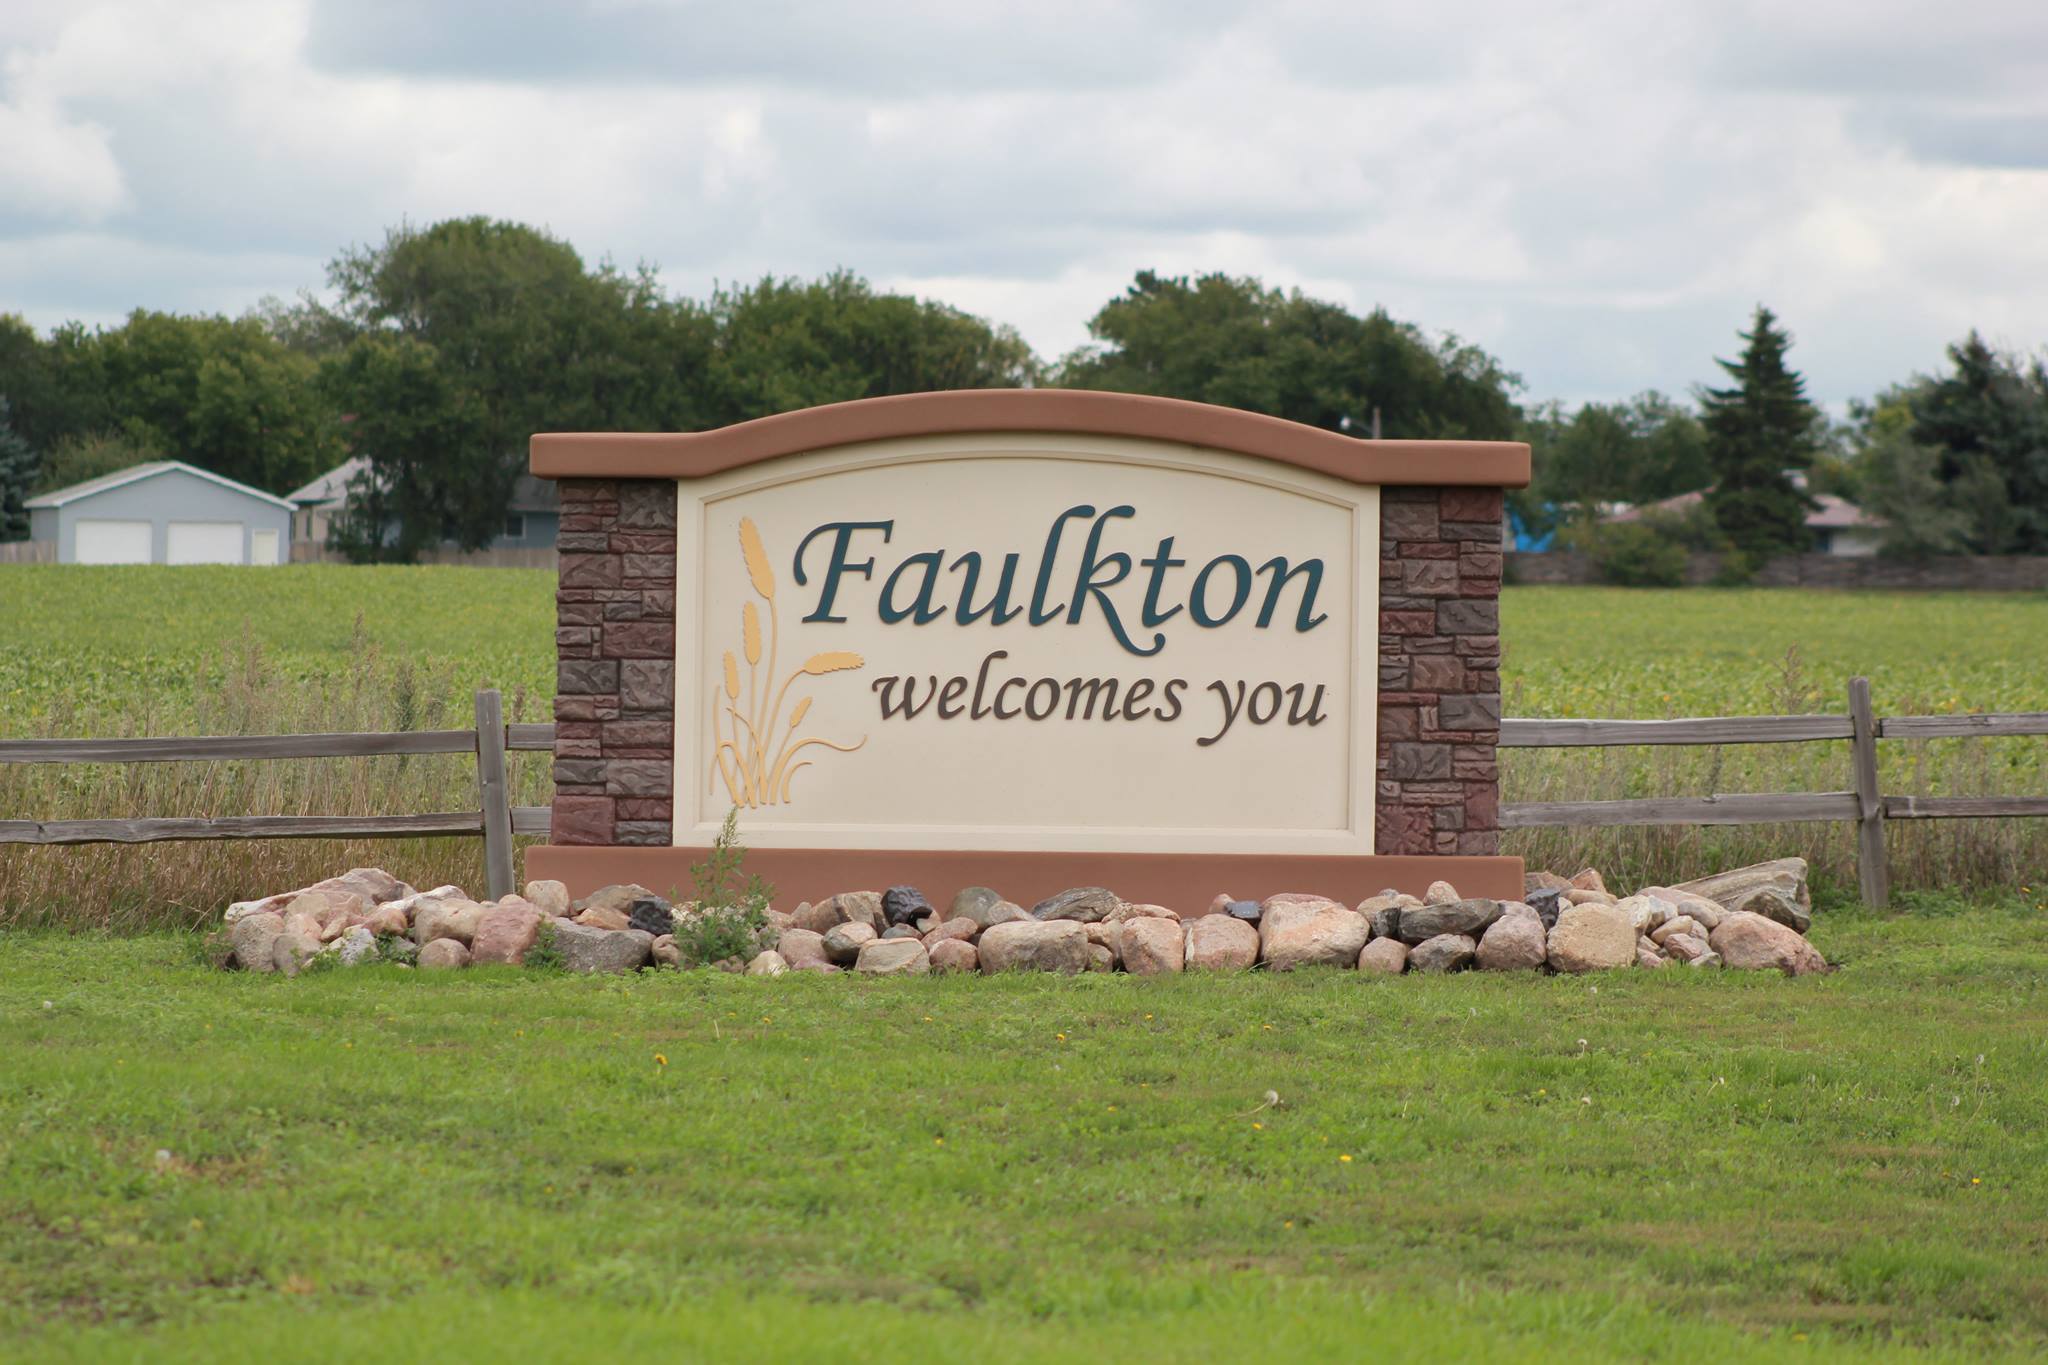 City of Faulkton welcome sign's image